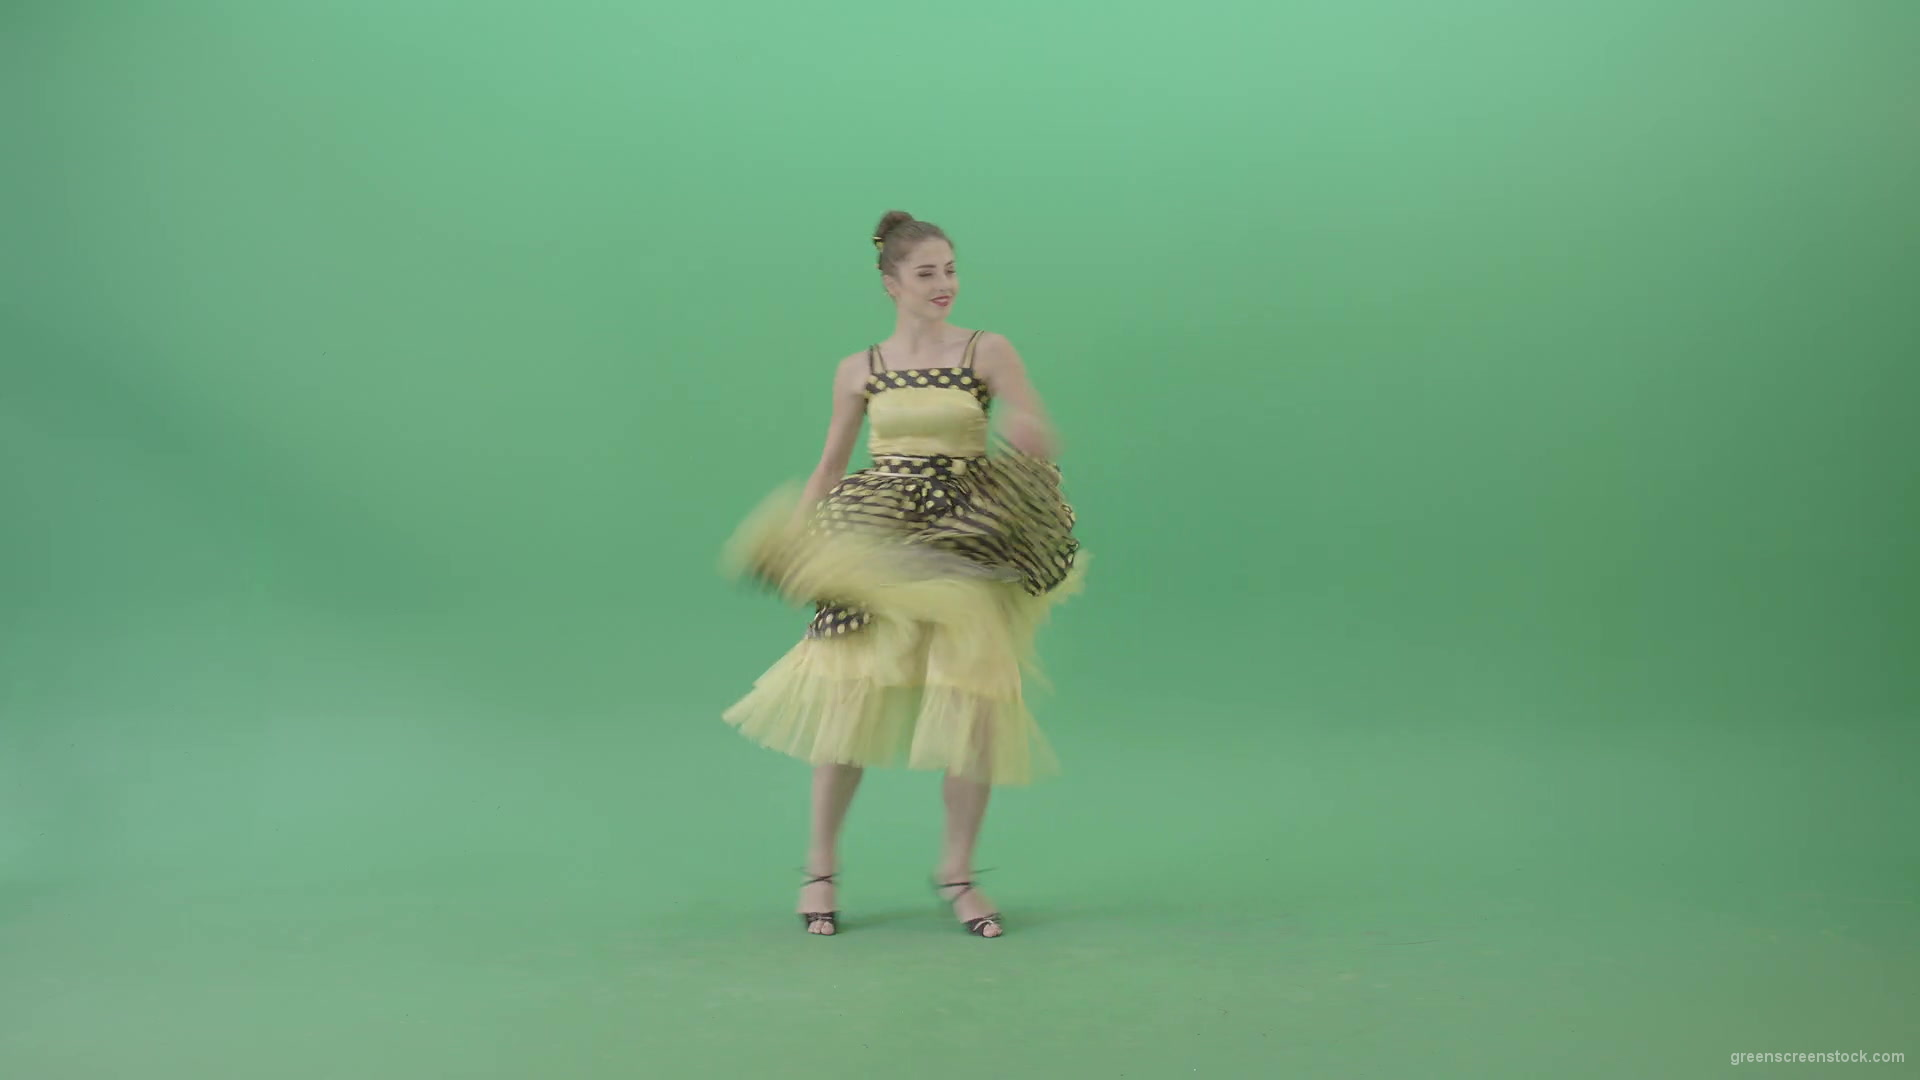 Elegant-Girl-in-Yellow-dress-Dancing-Boogie-woogie-and-chill-on-Green-Screen-4K-Video-Footage-1920_002 Green Screen Stock